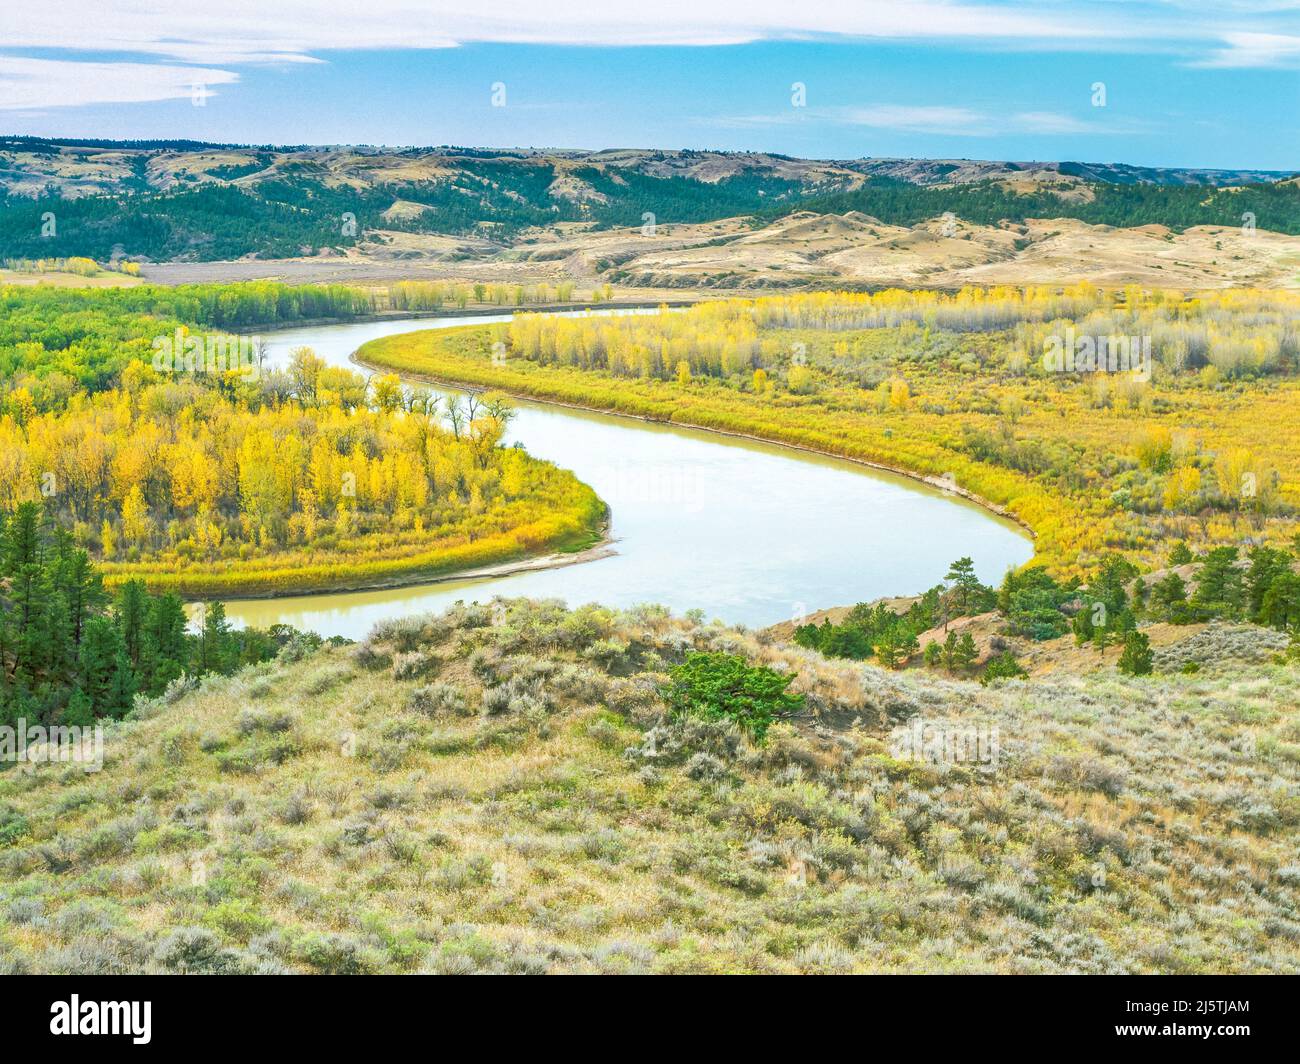 fall colors along the missouri river in charles m. russell national wildlife refuge near landusky, montana Stock Photo